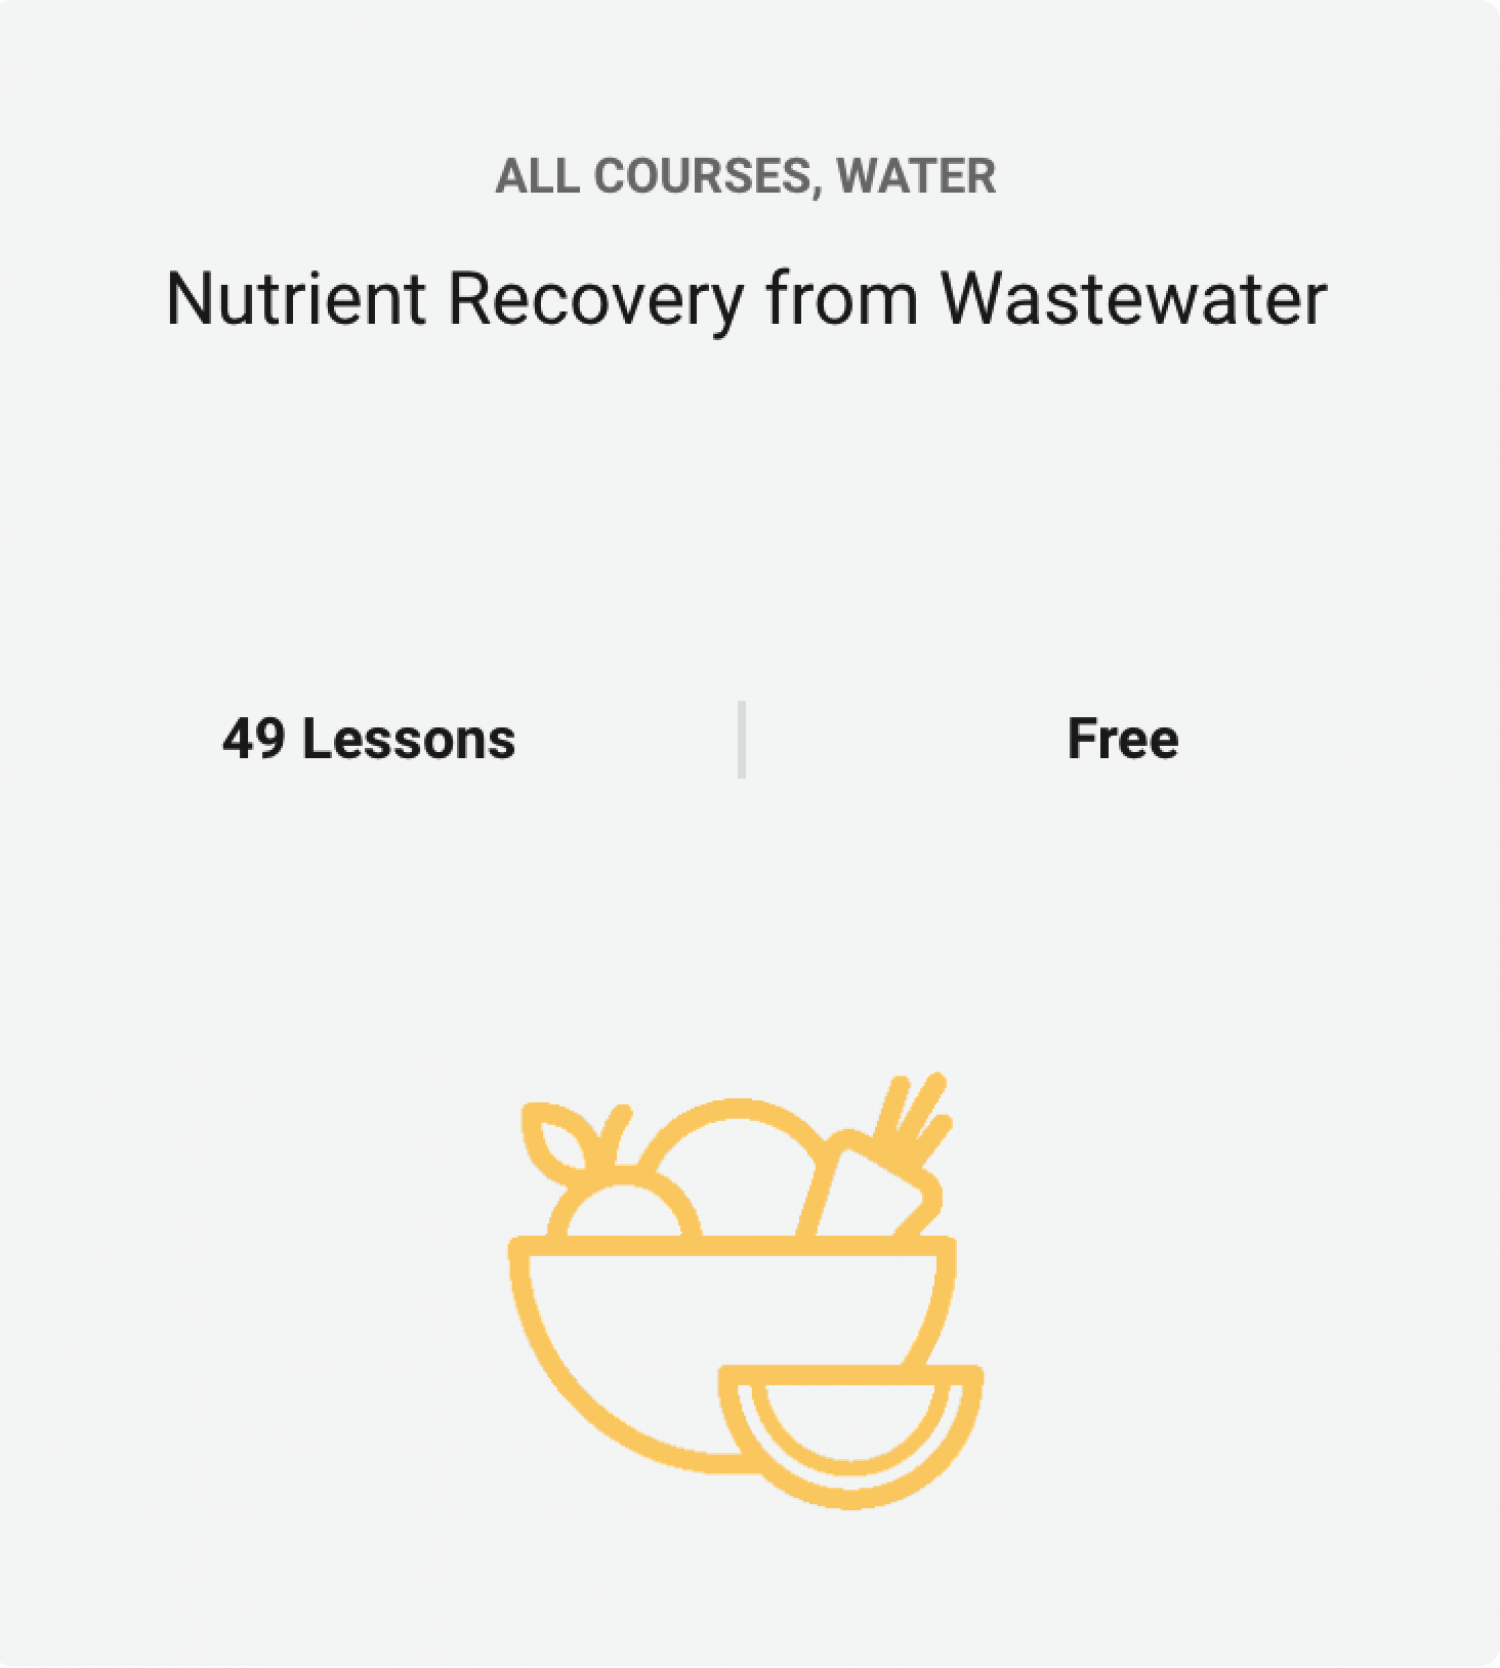 Nutrient Recovery from Wastewater